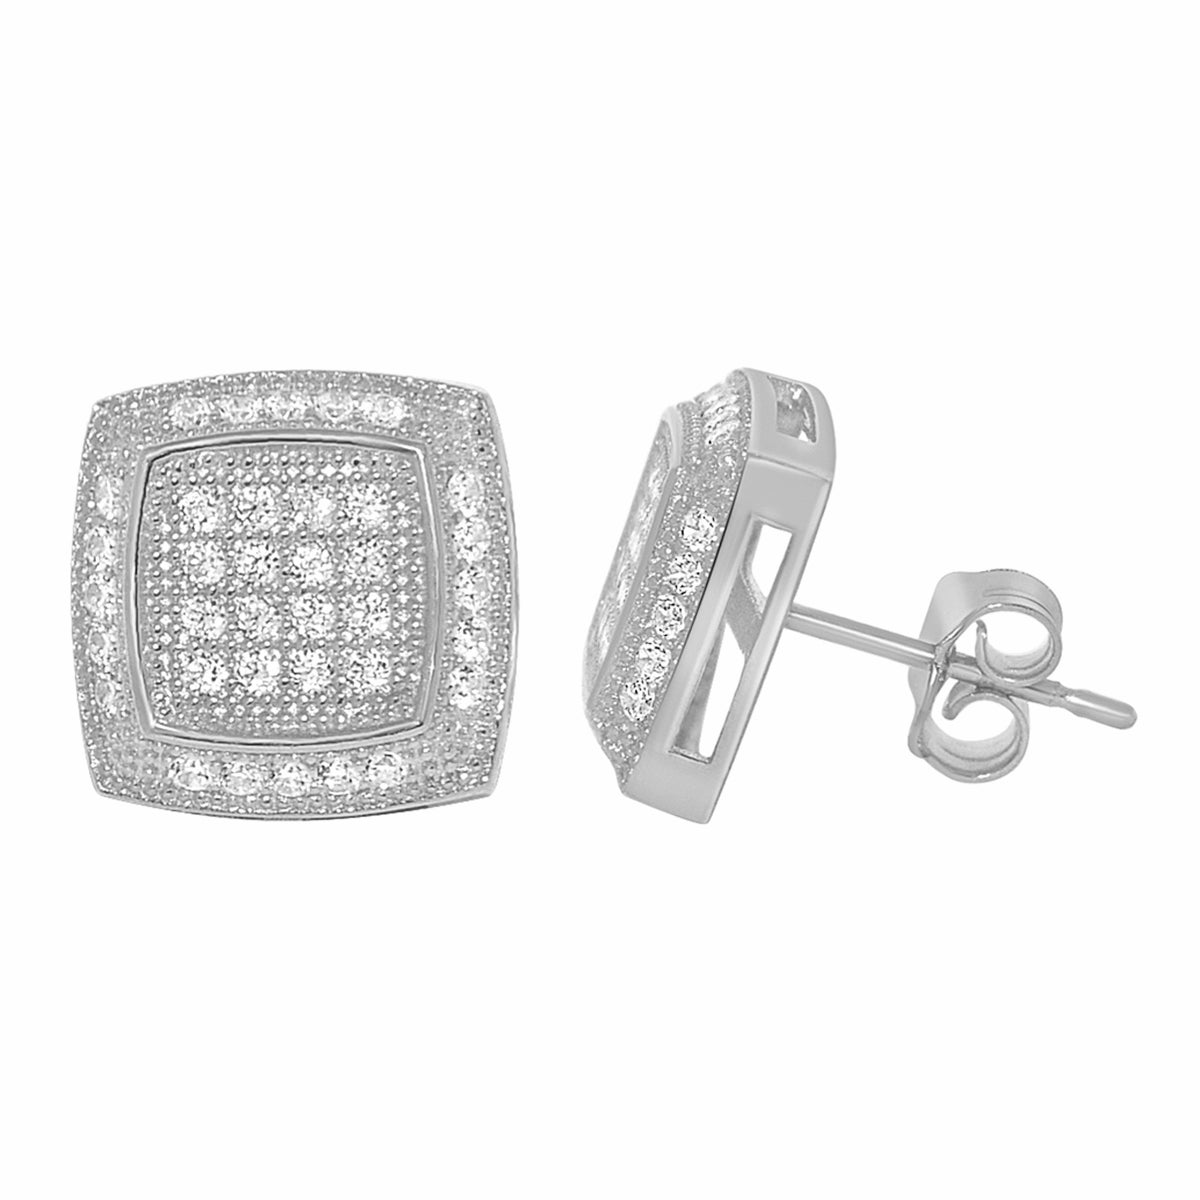 14k White Gold 10mm Pave'-set Cubic Zirconia Square Stud Earrings